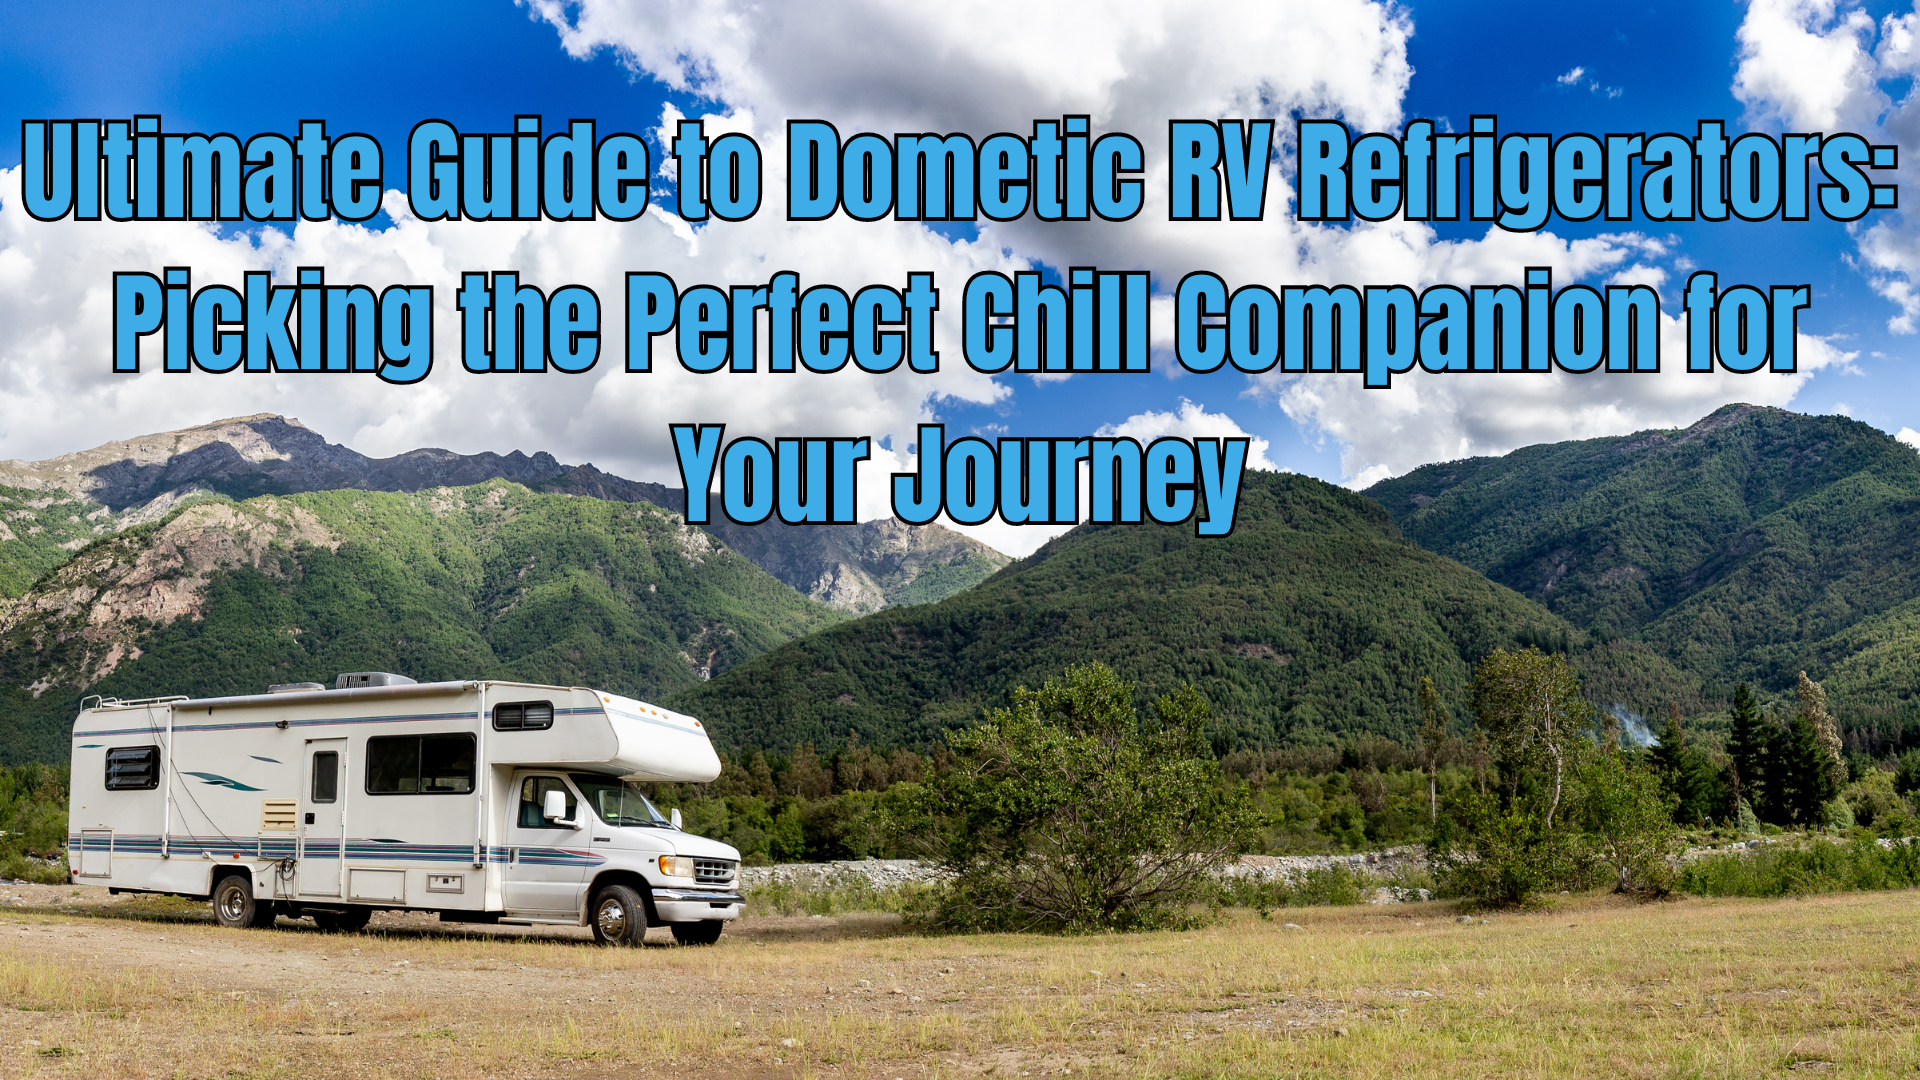 Ultimate Guide to Dometic RV Refrigerators: Picking the Perfect Chill Companion for Your Journey